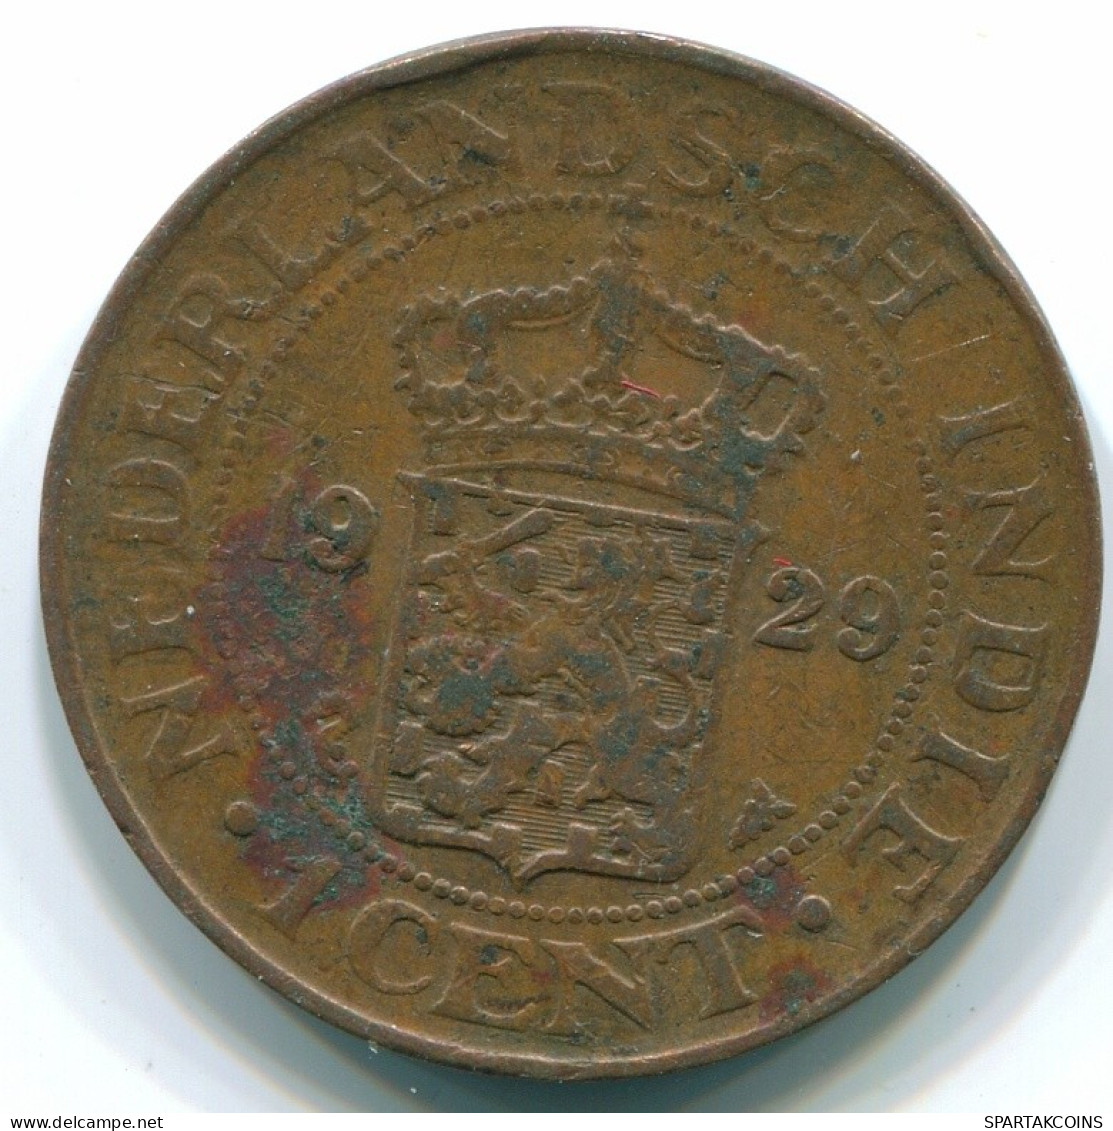 1 CENT 1929 NETHERLANDS EAST INDIES INDONESIA Copper Colonial Coin #S10103.U.A - Indes Néerlandaises